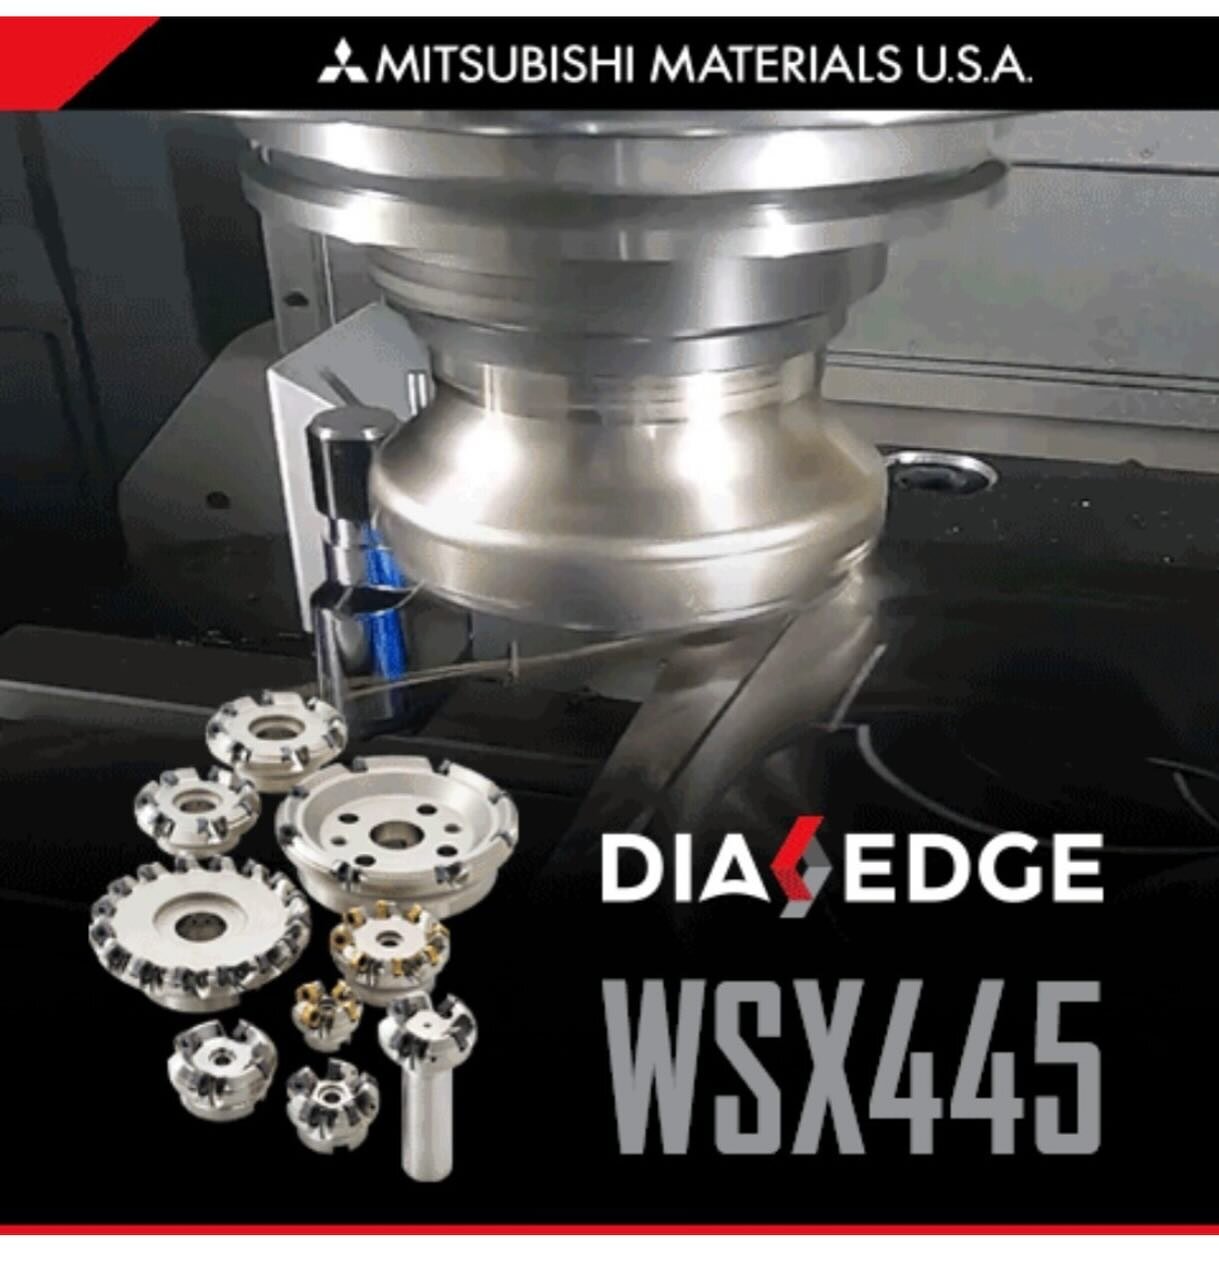 Repost @mitsubishi_materials_usa 

Looking for the perfect balance between convenience and high efficiency?

Look at the DIAEDGE WSX455 double-sided, insert-type face milling cutter with an innovative cutting edge.
It&rsquo;s designed to control abno